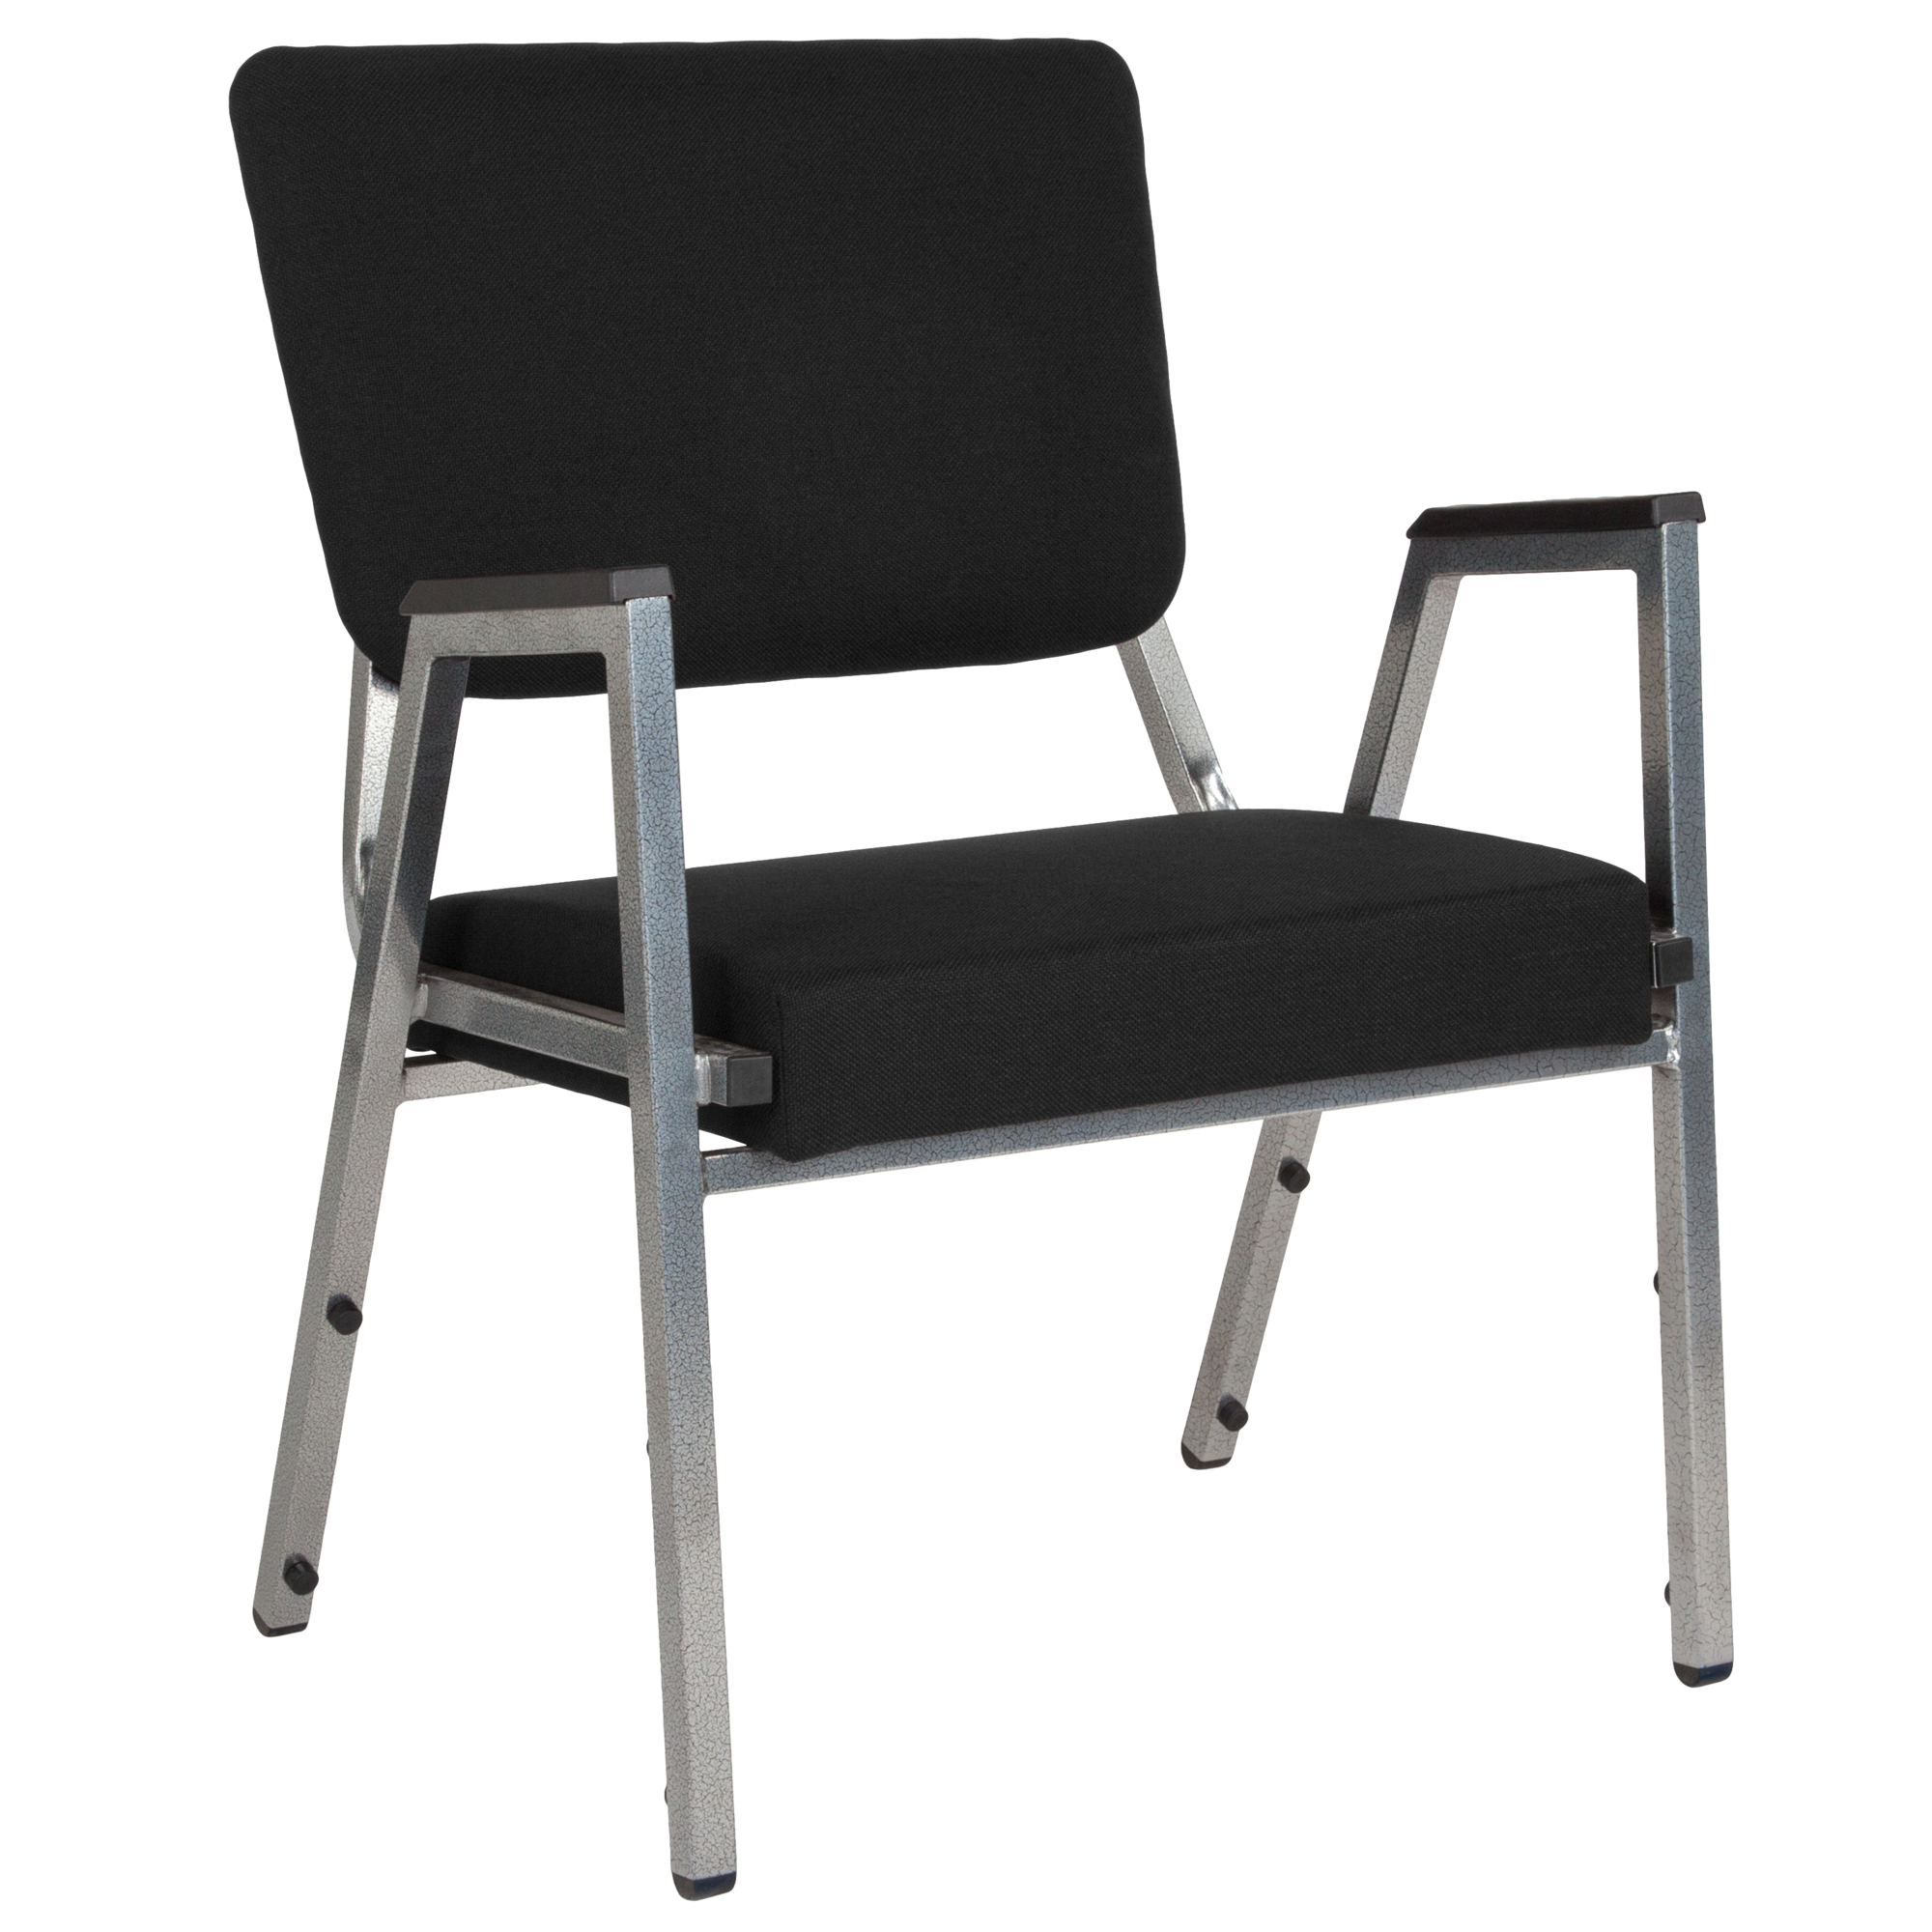 Flash Furniture, 1000 lb. Rated Black Fabric Bariatric Arm Chair, Primary Color Black, Included (qty.) 1, Model XU604436702BK